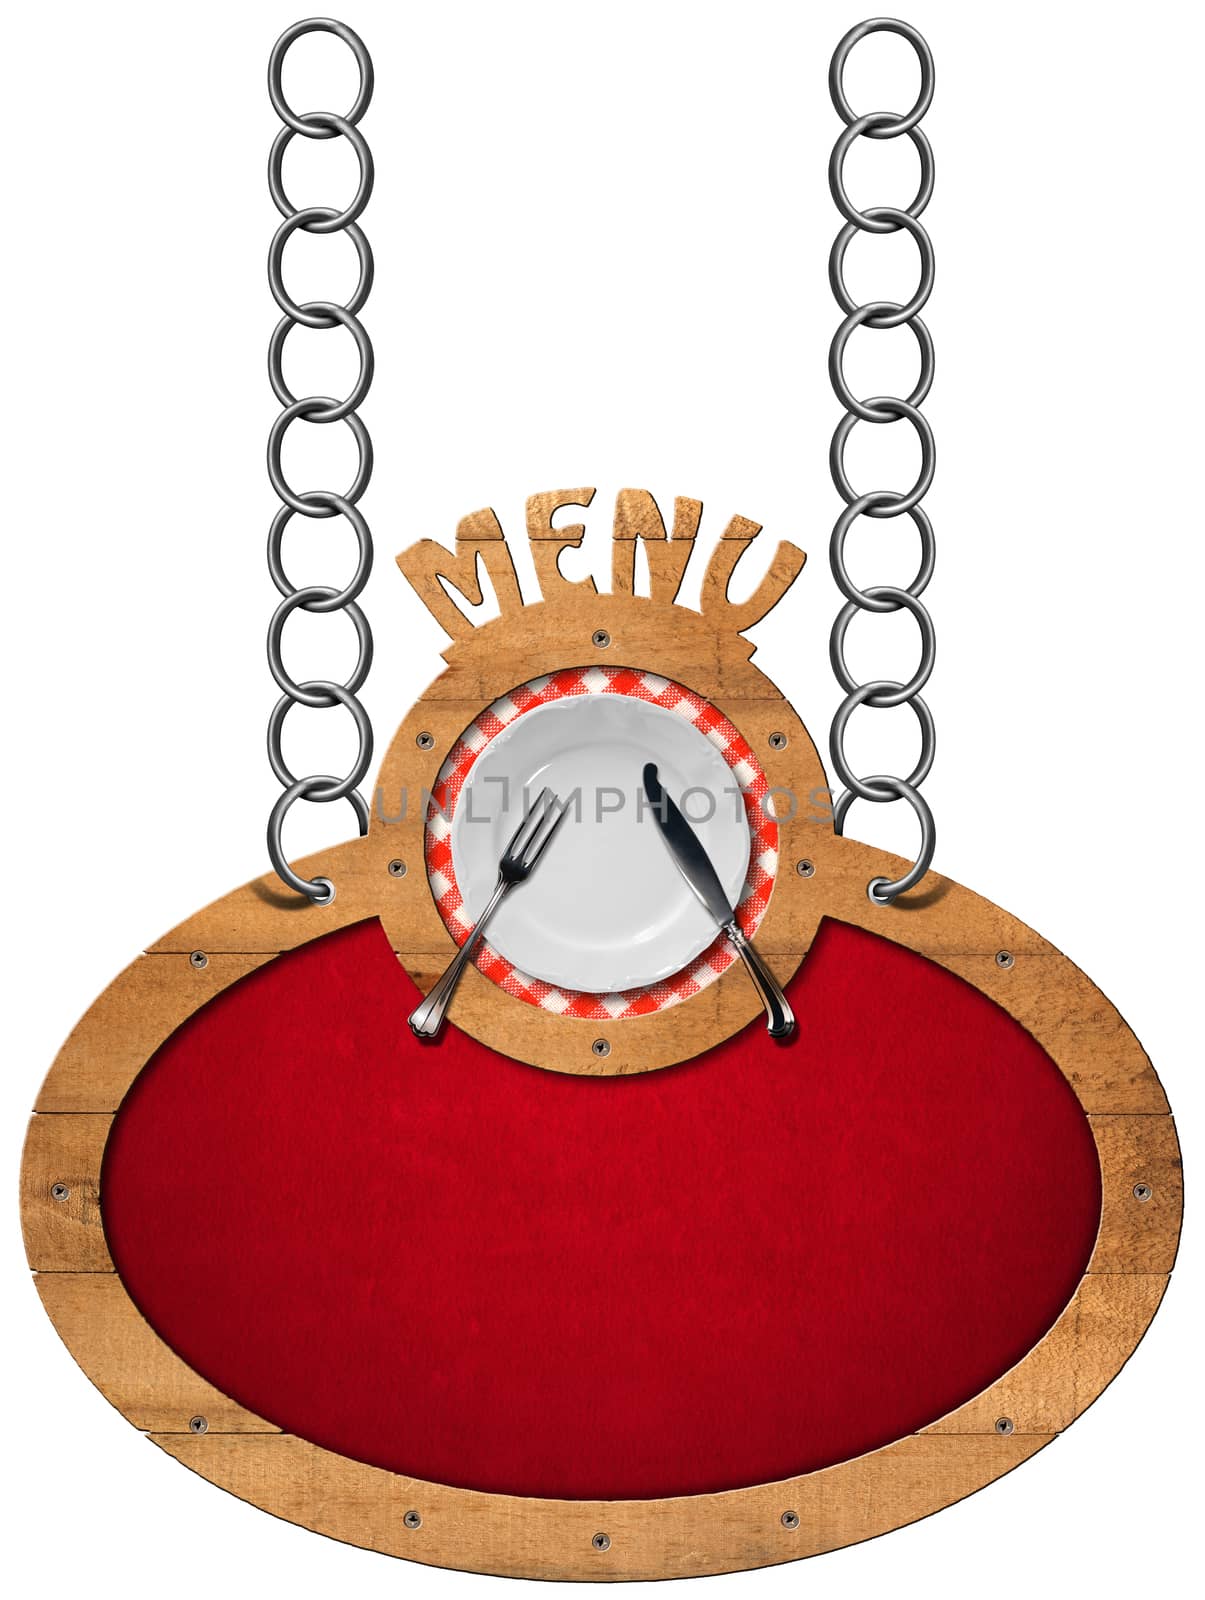 Oval sign with wooden frame, white plate with silver cutlery and text menu. Hanging from a metal chain and isolated on a white